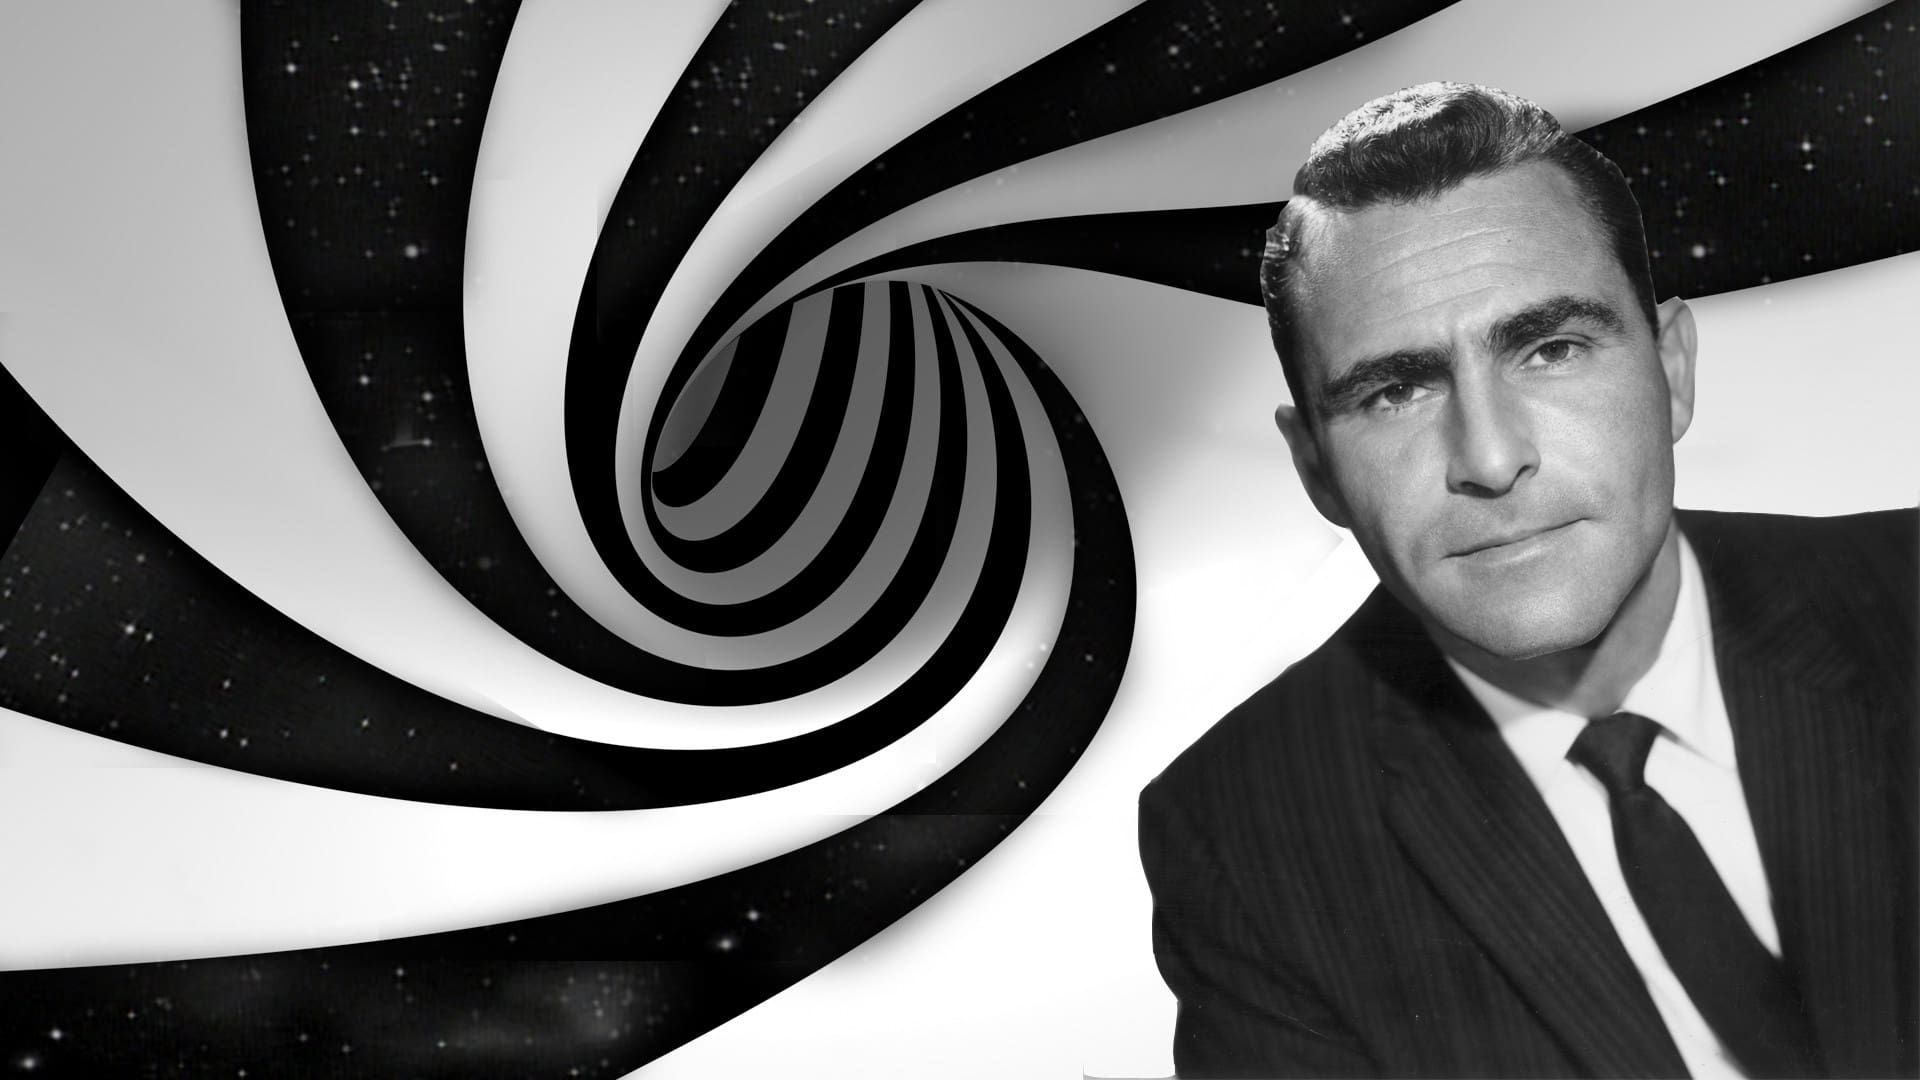 The Twilight Zone (1959) IT or NOT (Bion)